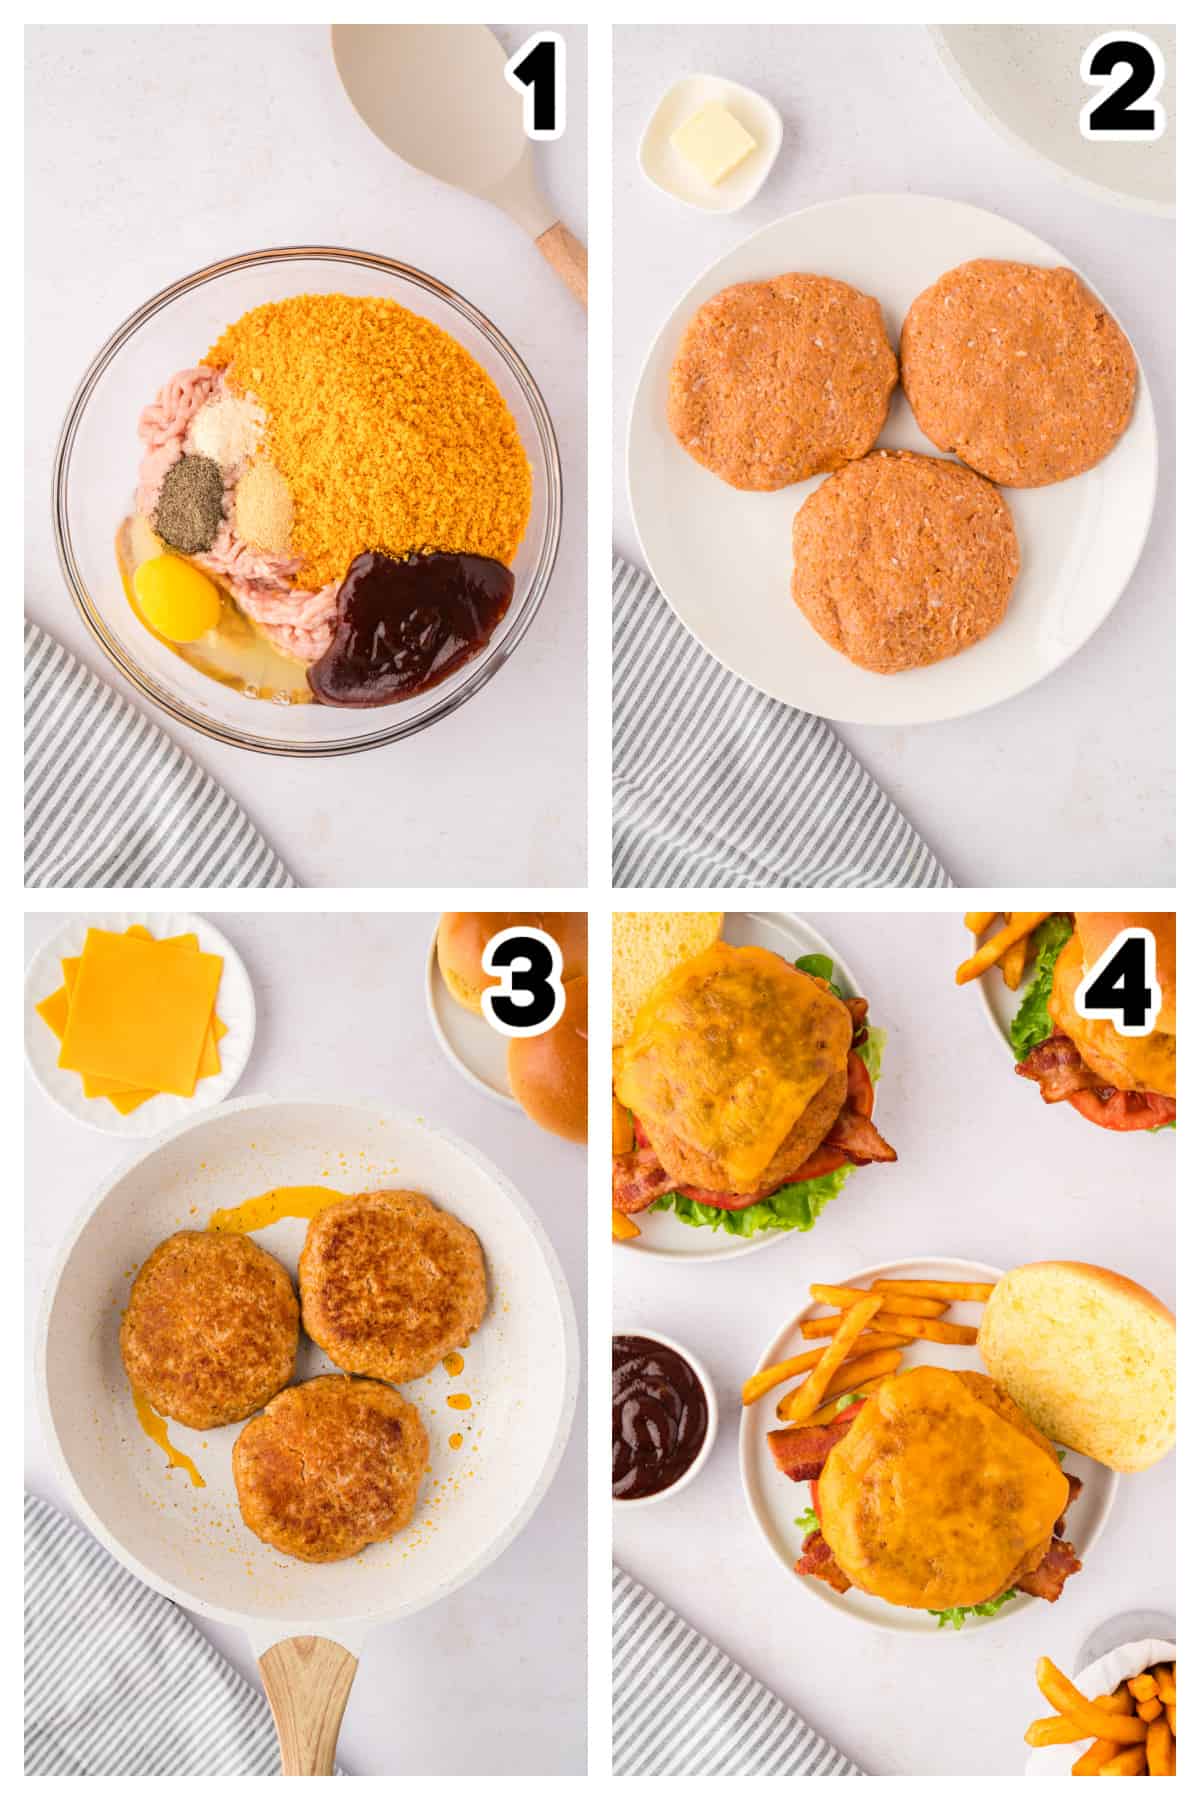 Collage showing how to make bbq chicken burgers.